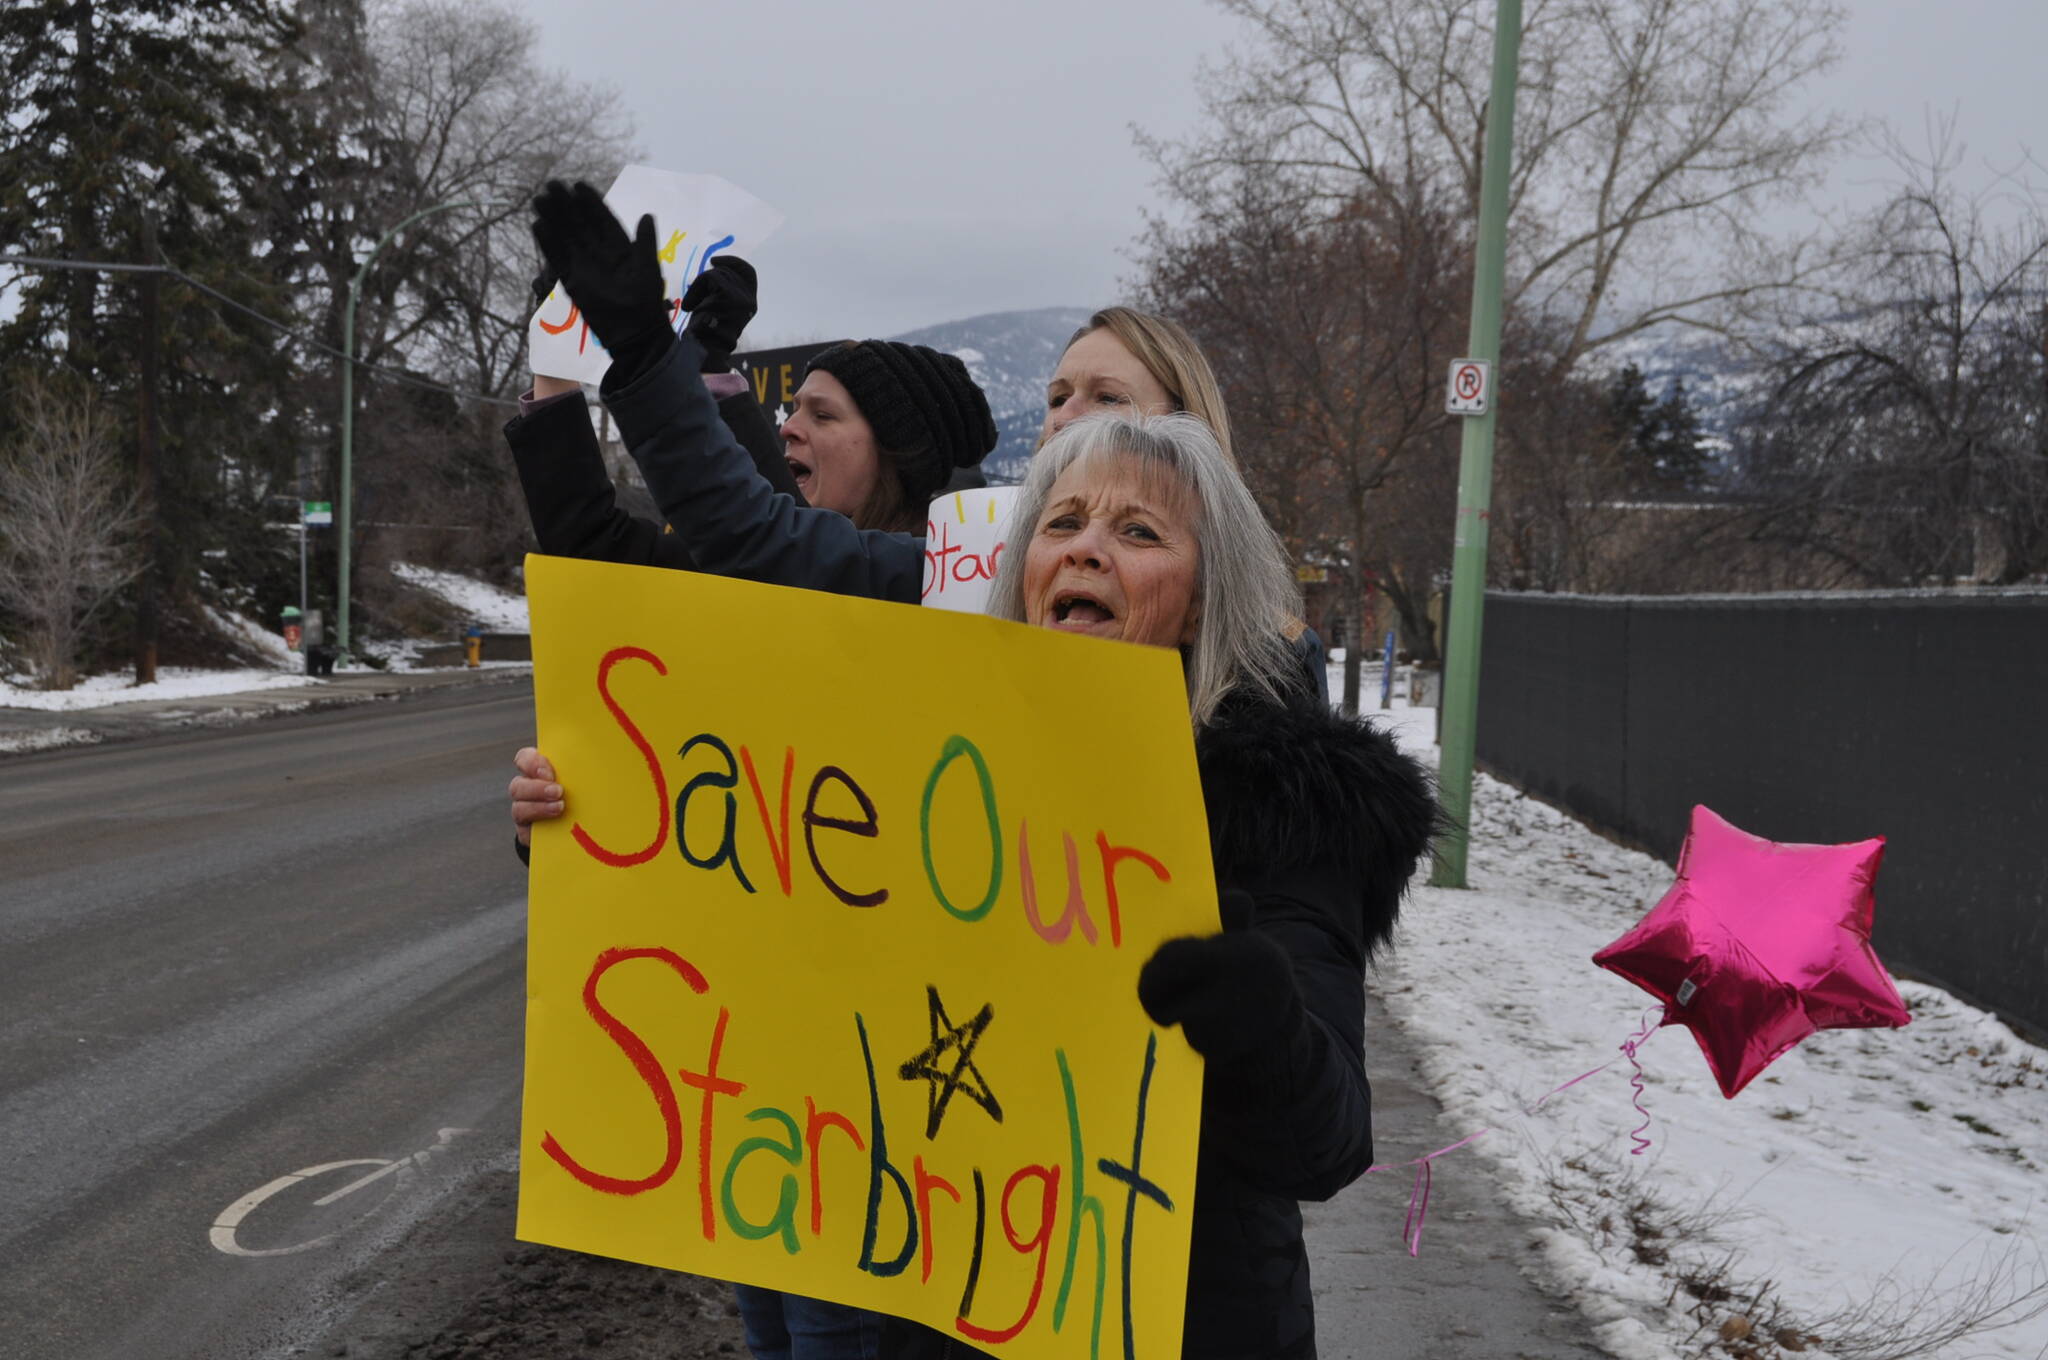 A crowd of around 150 people gathered at Starbright child development care centre to celebrate their new two-year extension but also to continue their fight to keep the centre alive. (Jordy Cunningham/Capital News)